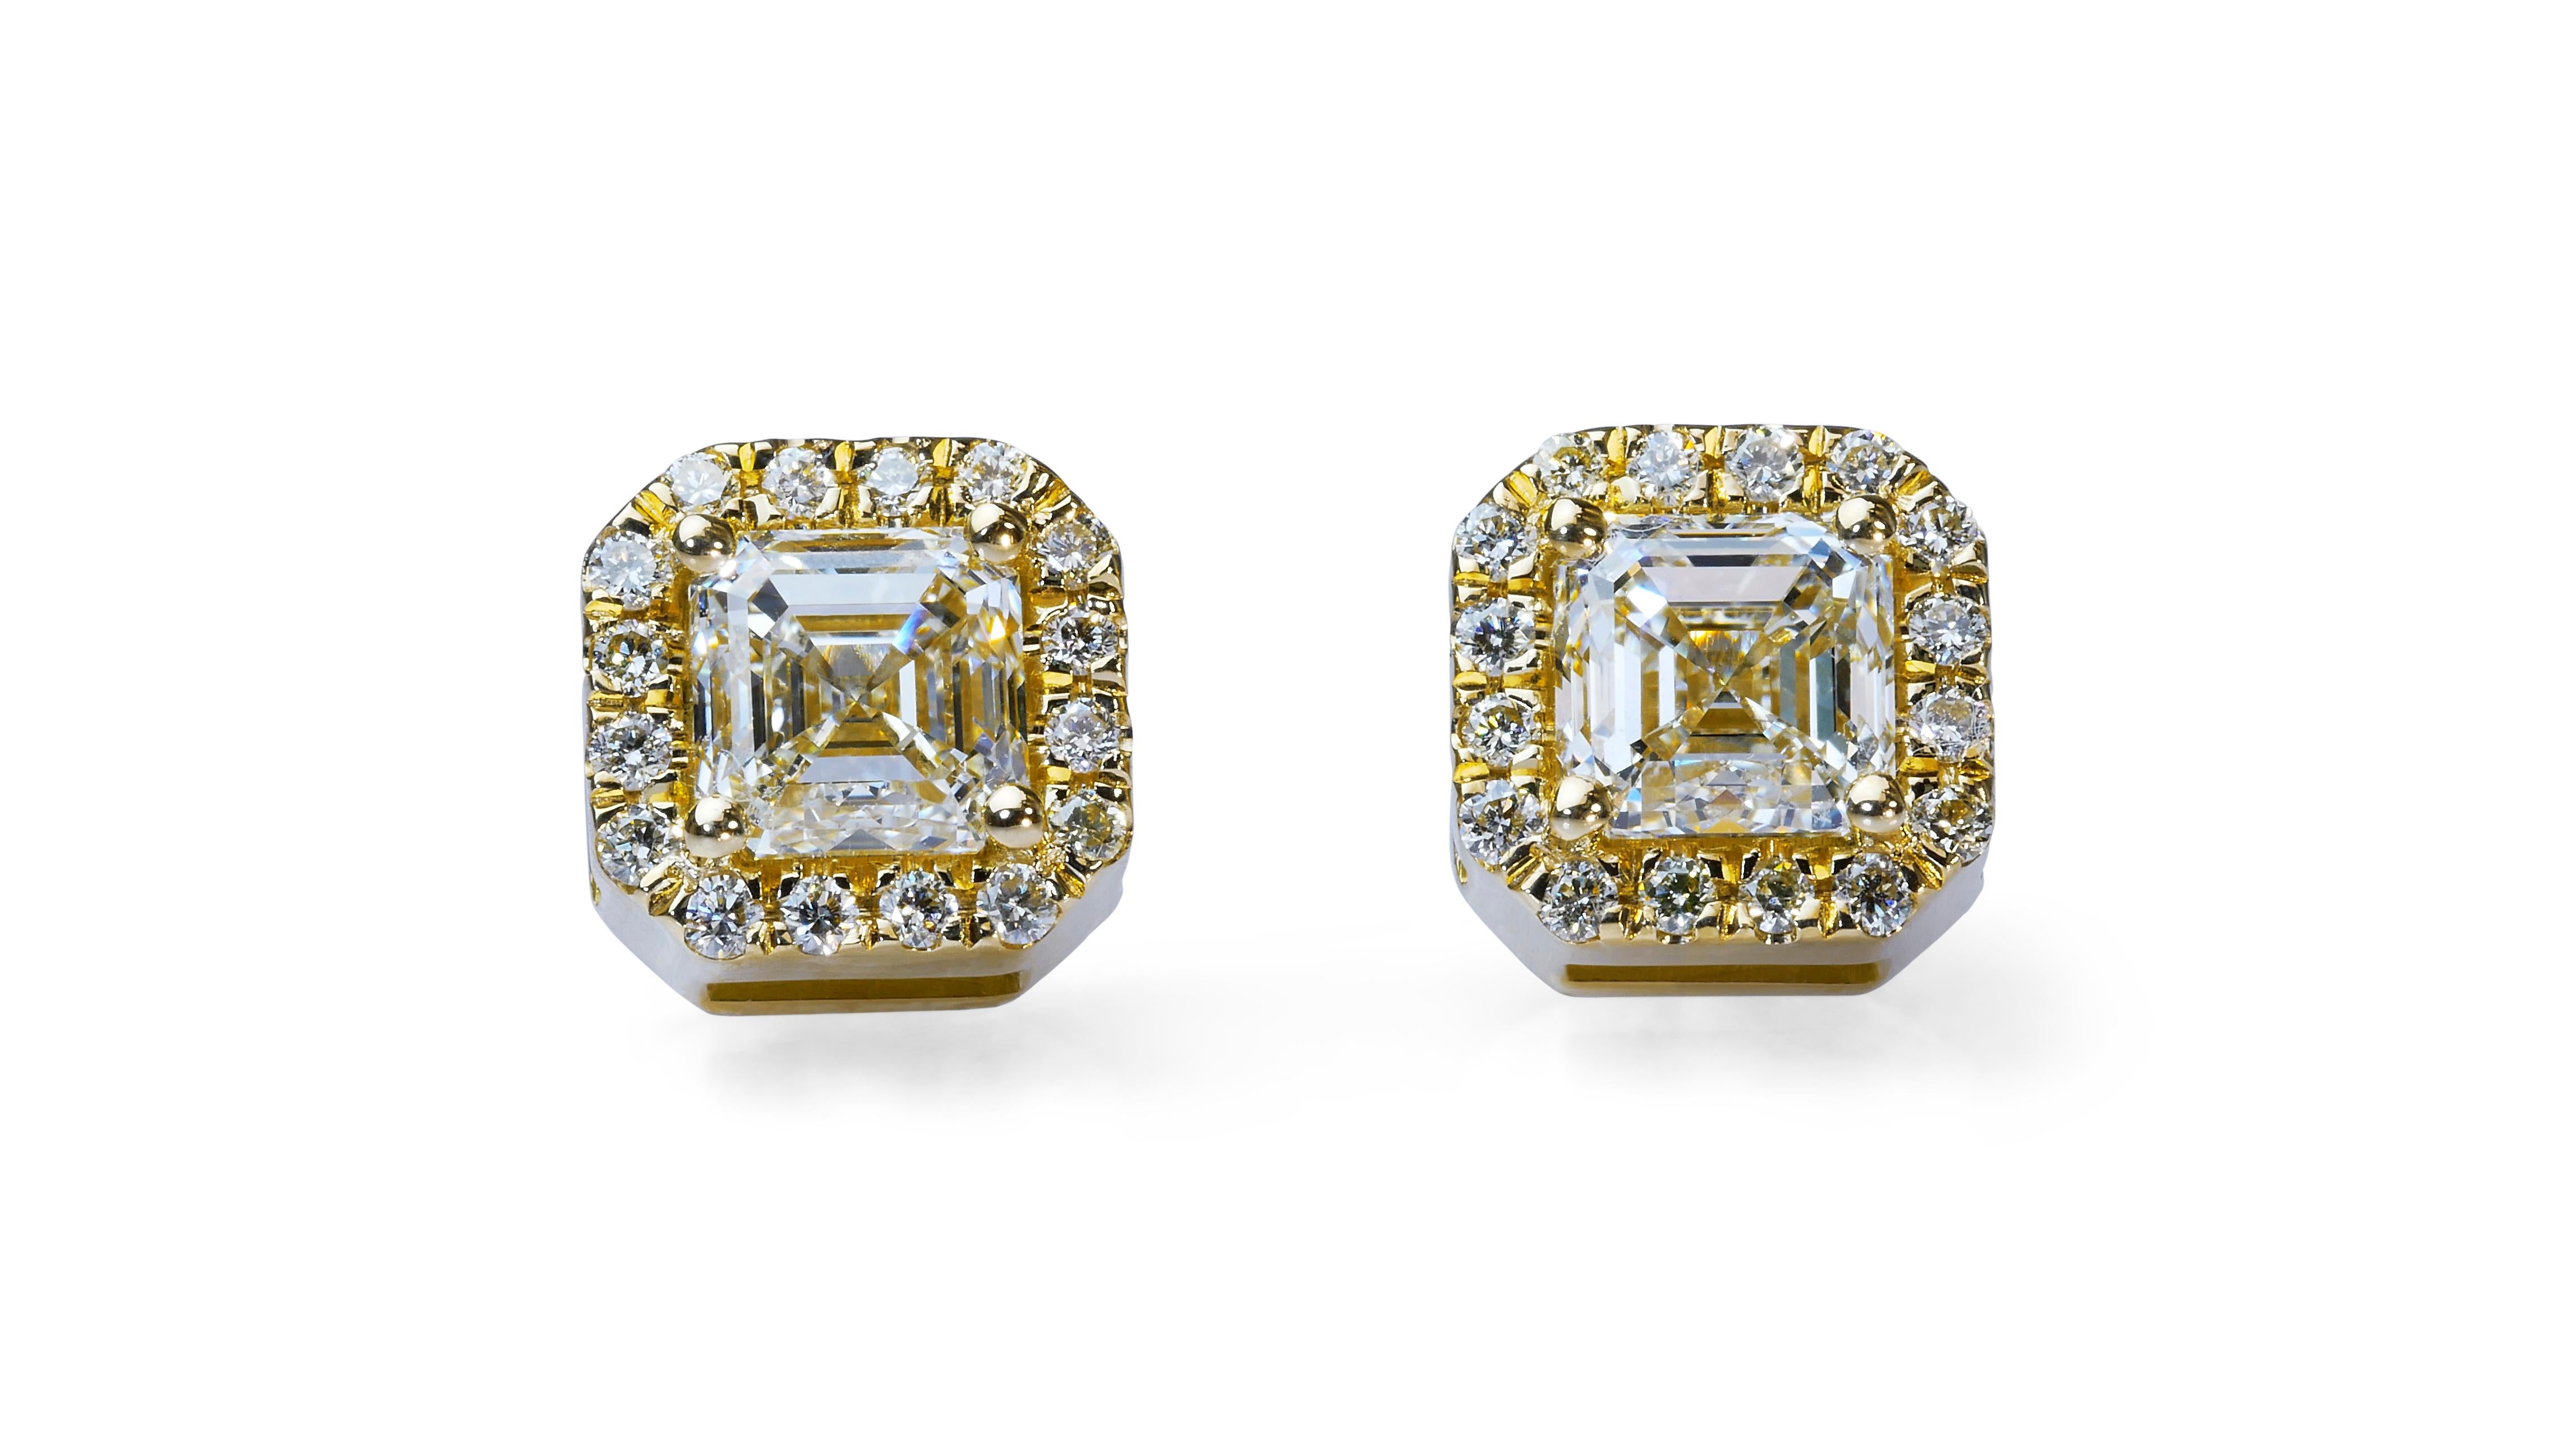 Magnificent 1.74ct Diamond Stud Earrings in 18k Yellow Gold - GIA Certified  For Sale 2